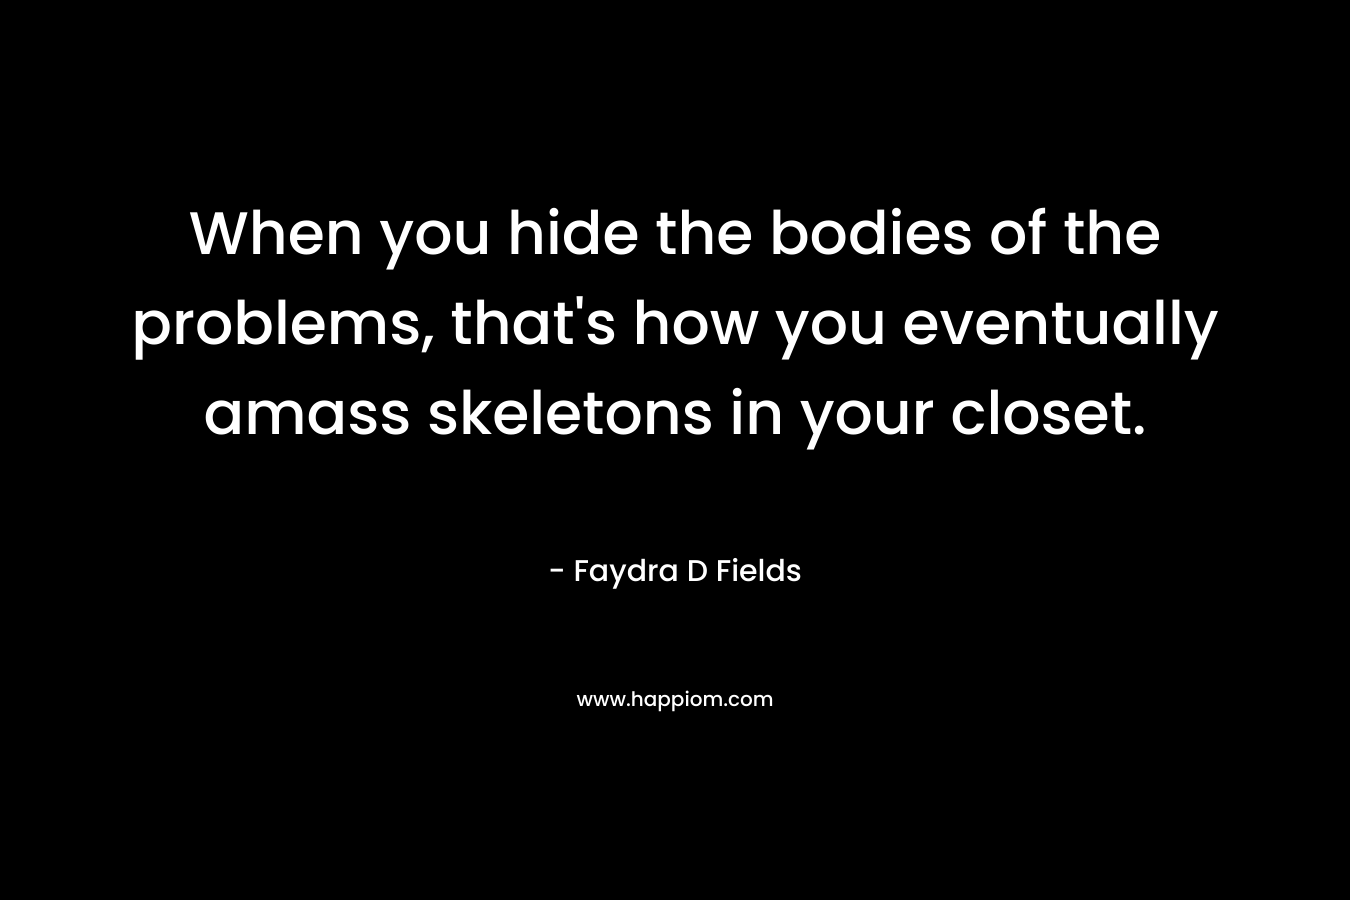 When you hide the bodies of the problems, that’s how you eventually amass skeletons in your closet. – Faydra D Fields